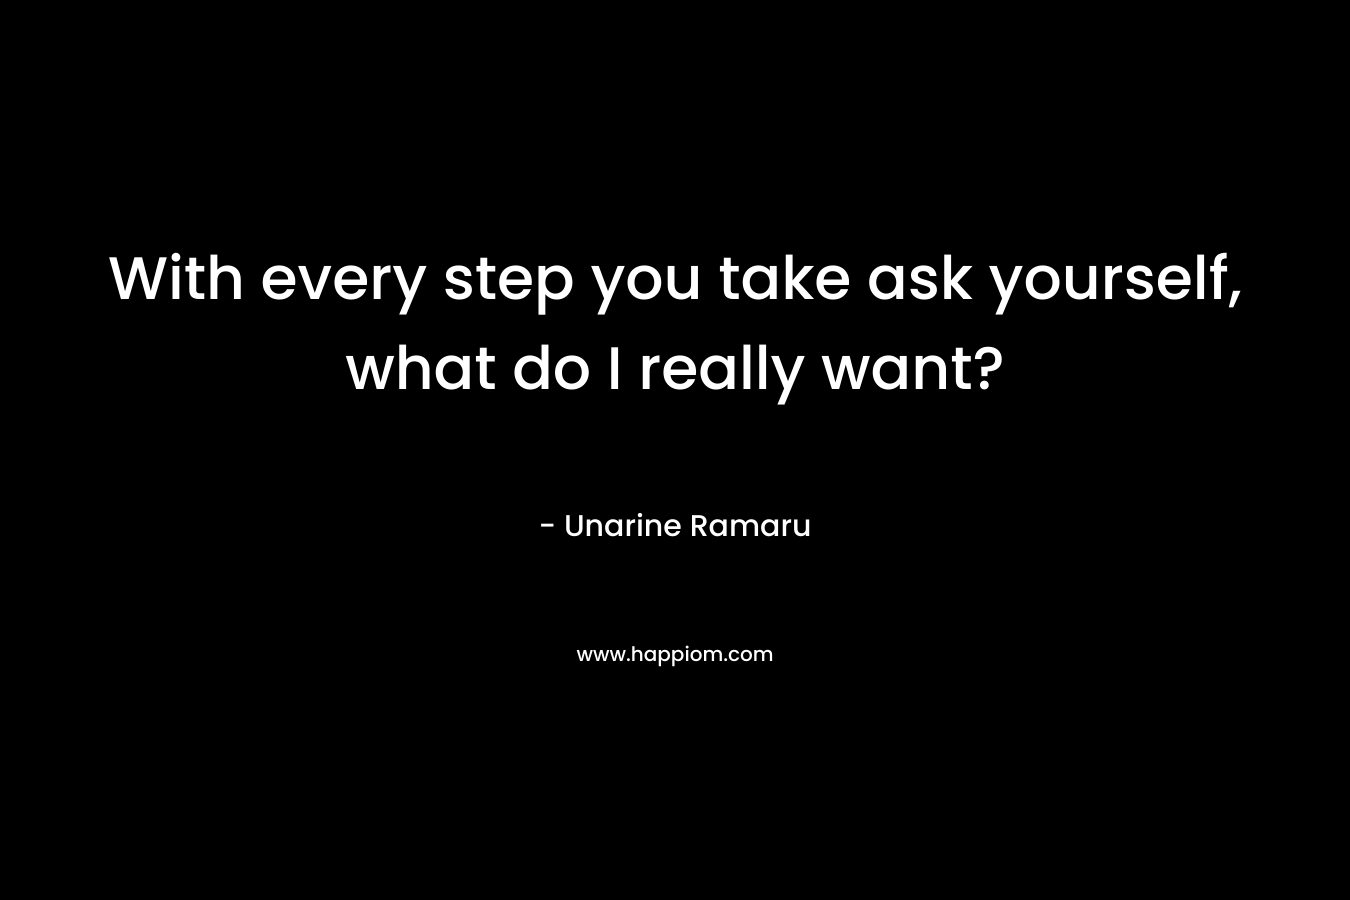 With every step you take ask yourself, what do I really want?